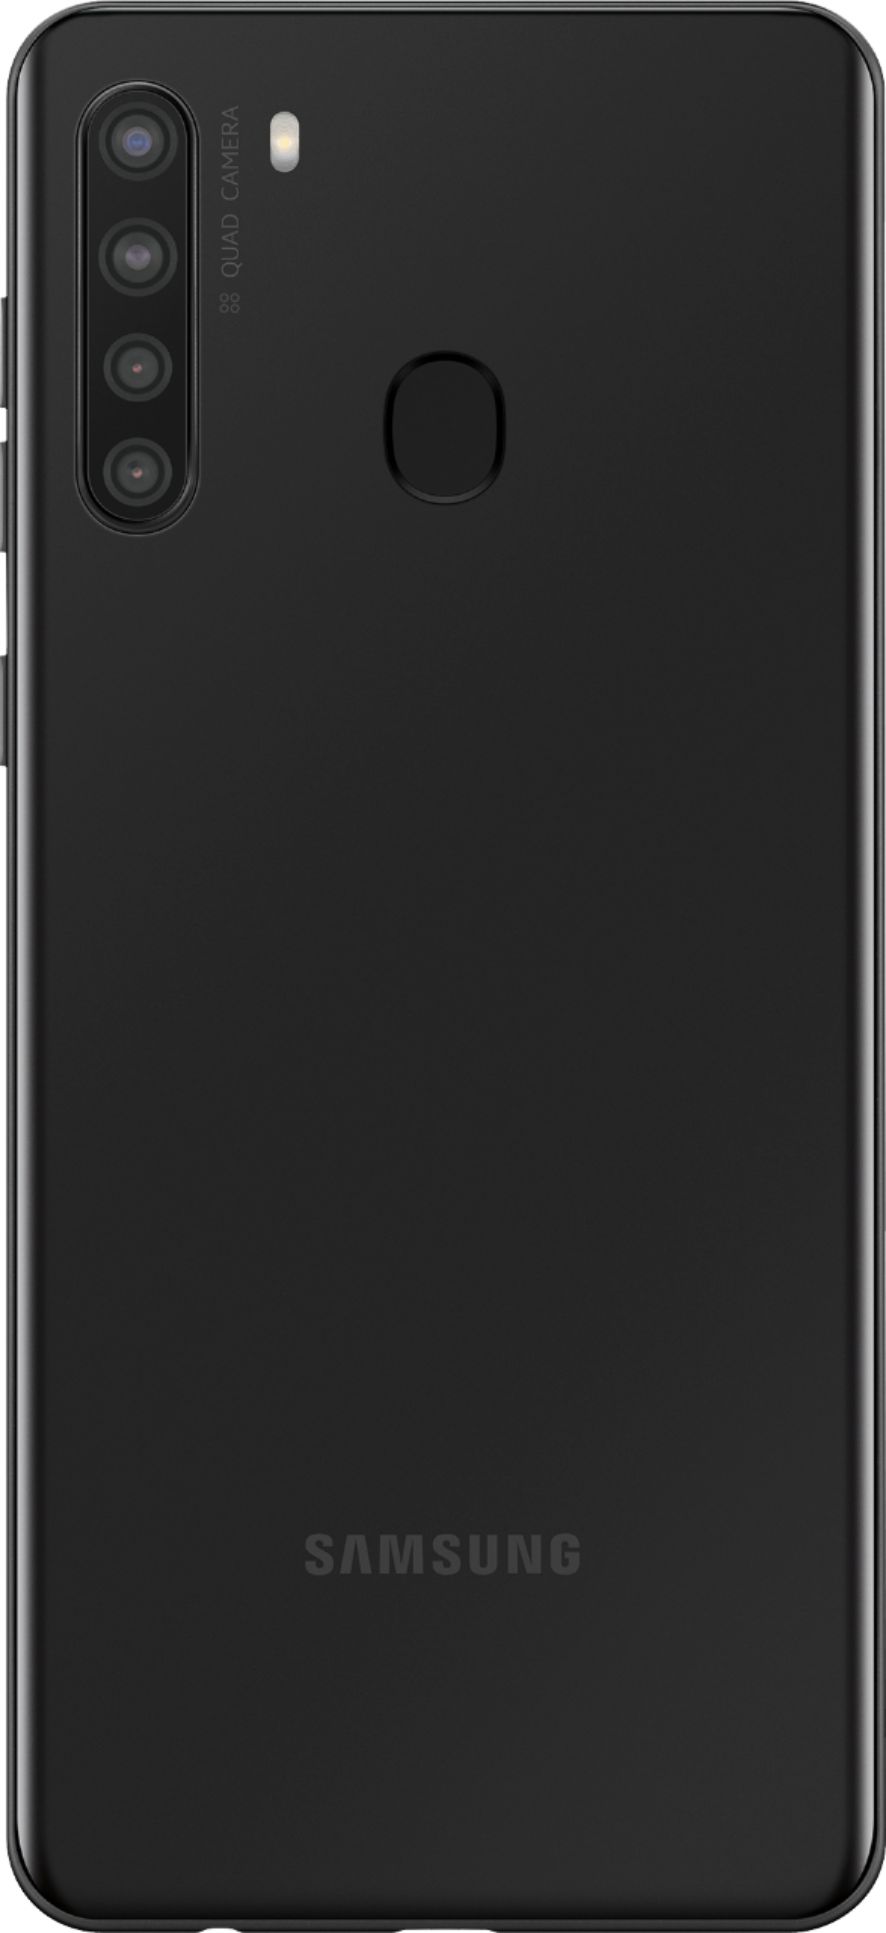 Back View: SaharaCase - Classic Case with Glass Screen Protector for Samsung Galaxy S8 - Black